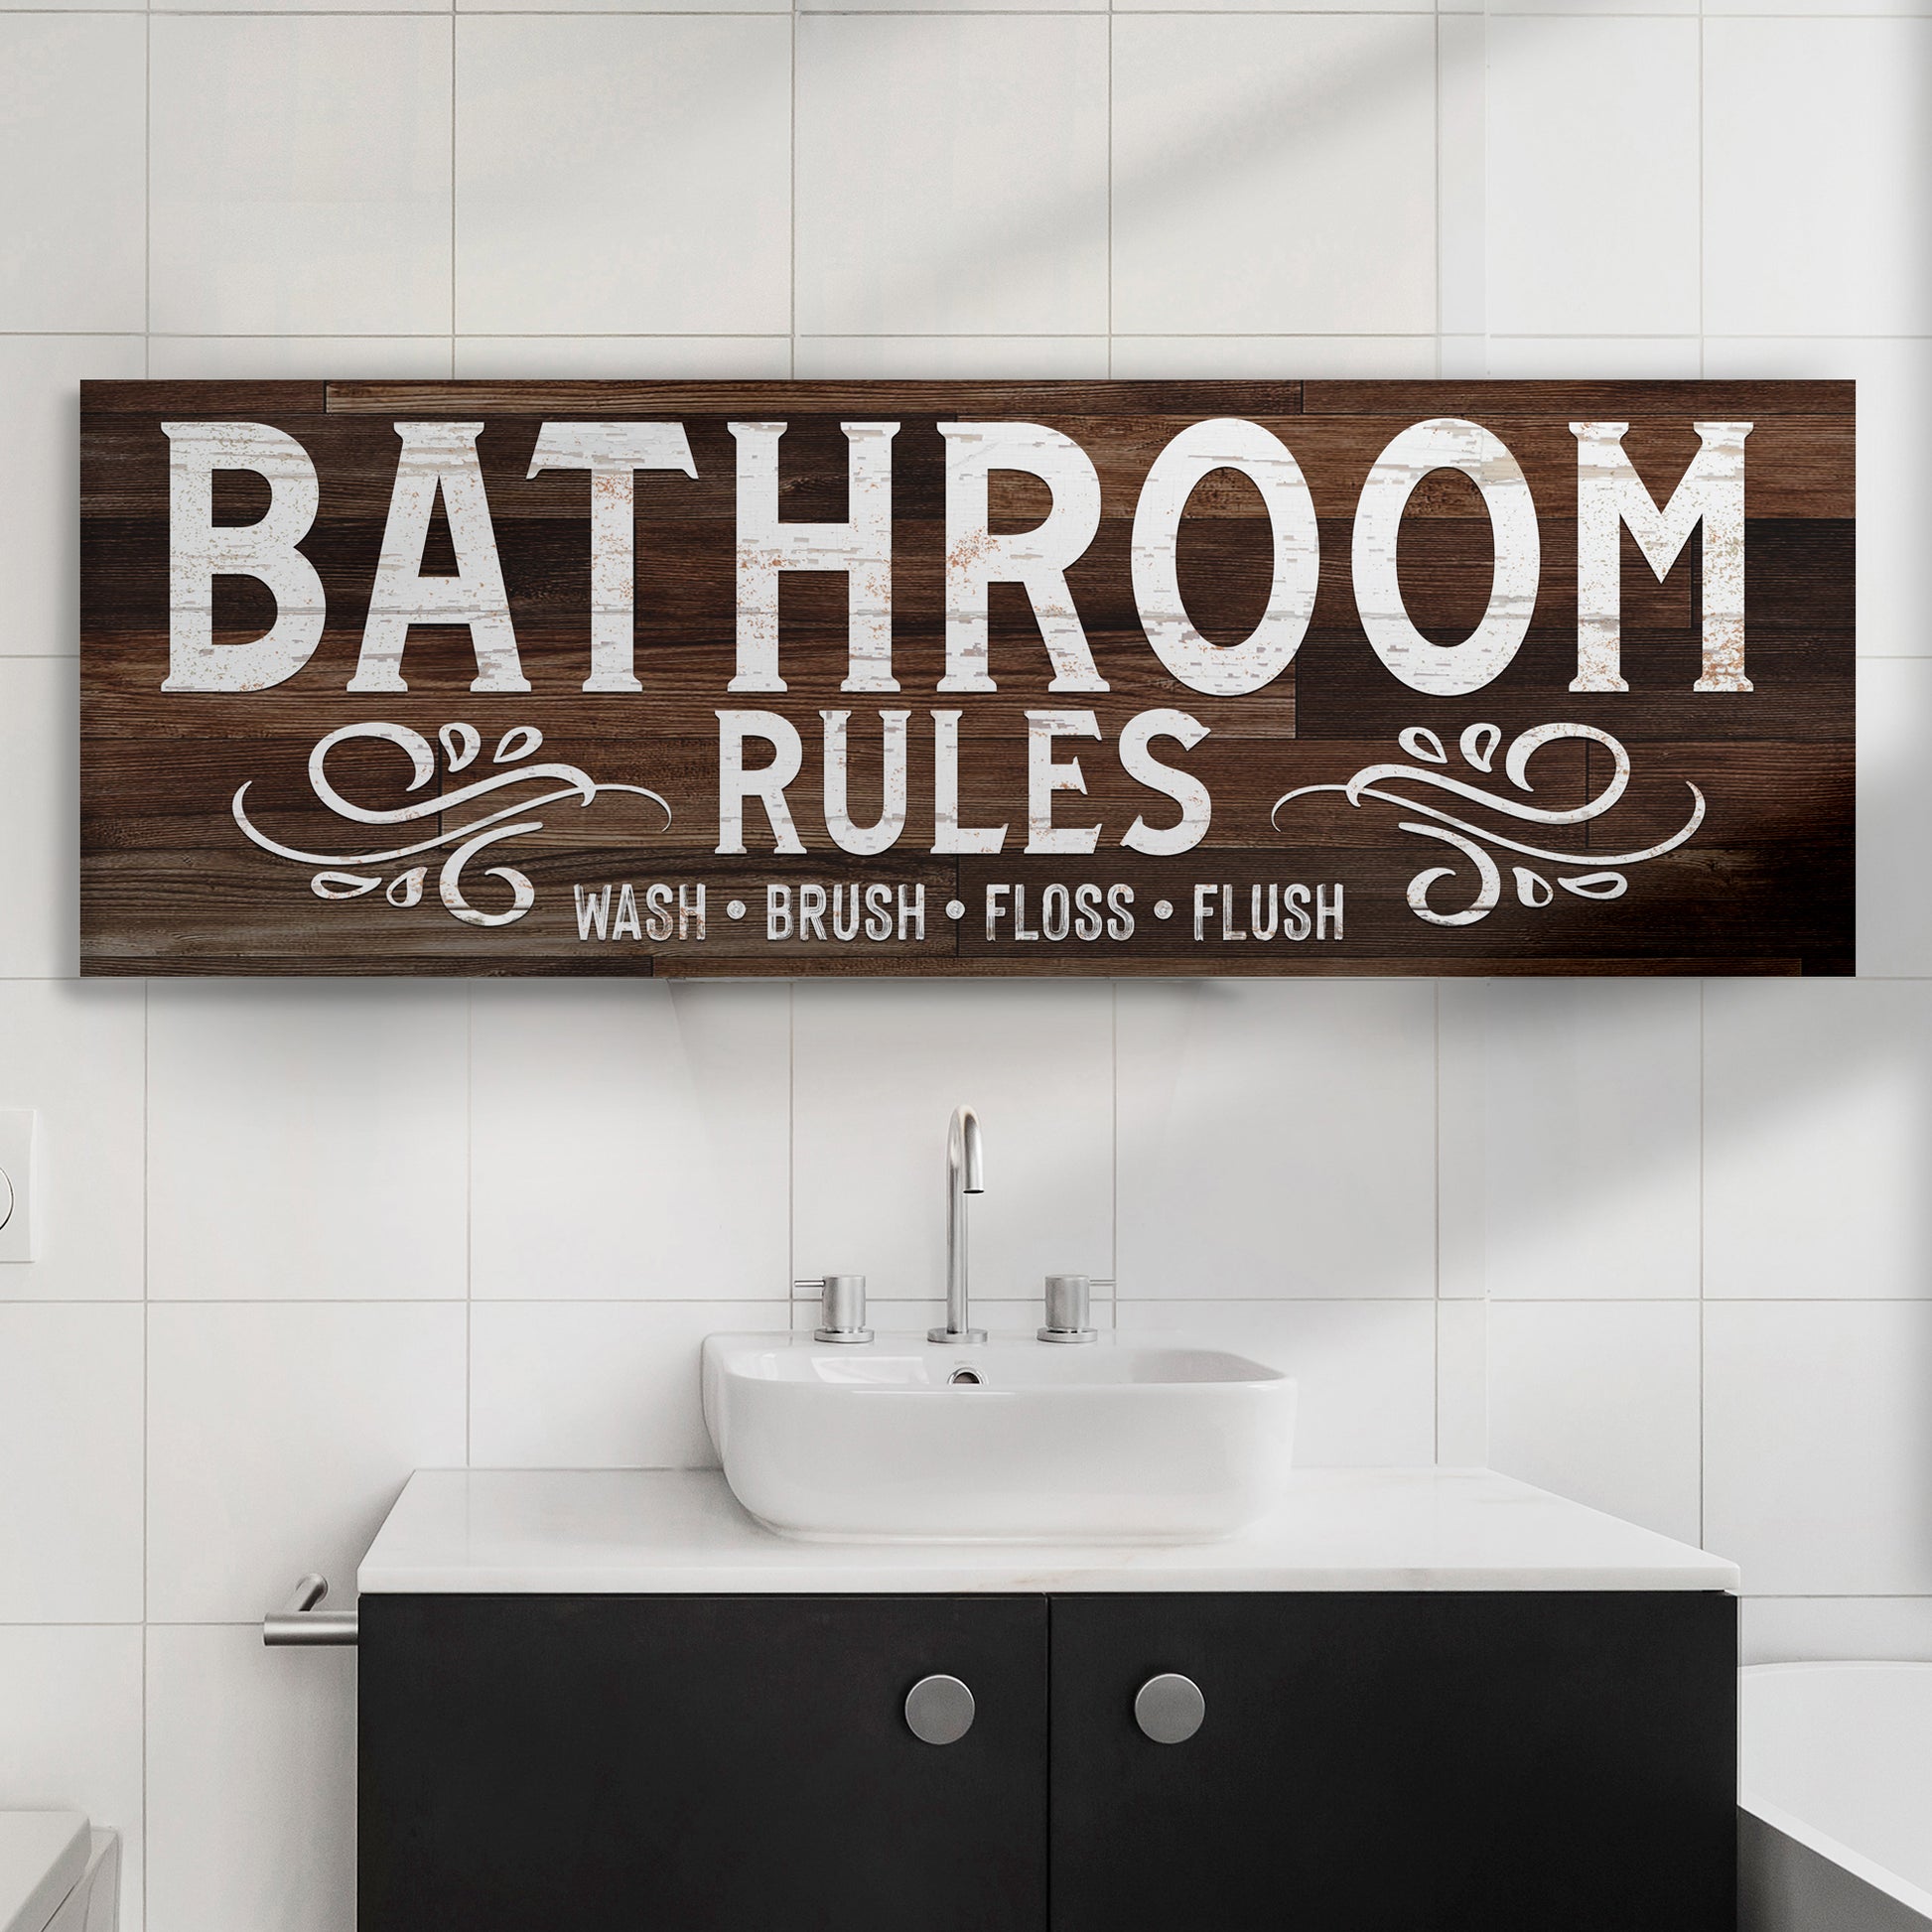 Bathroom Rules Sign - Image by Tailored Canvases